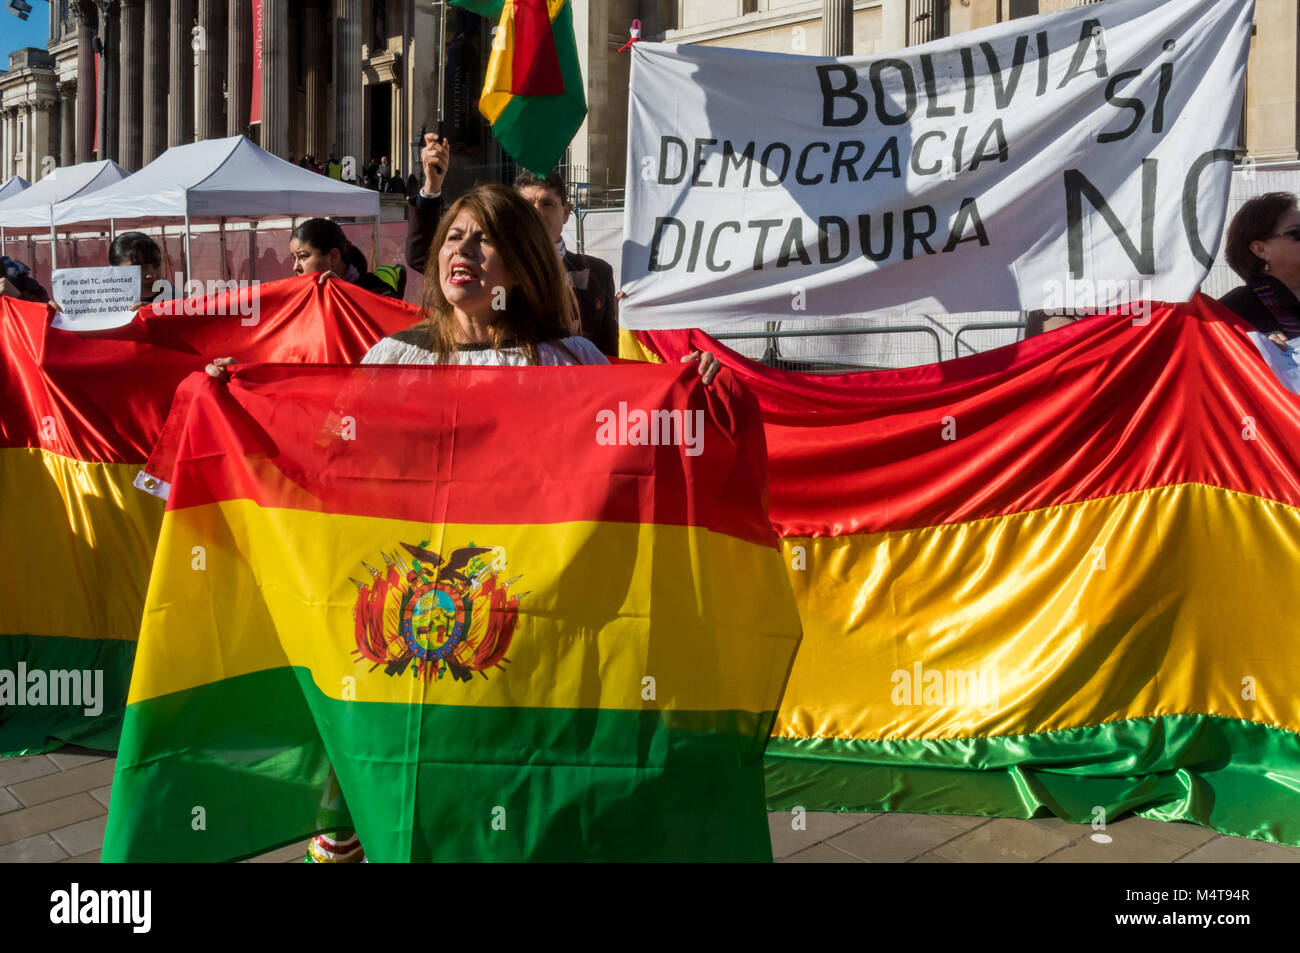 February 17, 2018 - London, UK. 17th February 2018. Bolivians protest in Trafalgar Square against President Evo Morales who won a Supreme Court appeal which will allow him to run for a fourth term in 2019 after a referendum on 21st February 2016 had voted down the constitutional change. The government argued it had lost because of an illegal defamatory campaign against Morales who is the country's first indigenous leader, in office since 2006, and says he needs more time in power in order to consolidate his party's programme of of social reforms. The protesters accuse him of wanting to be a d  Stock Photo